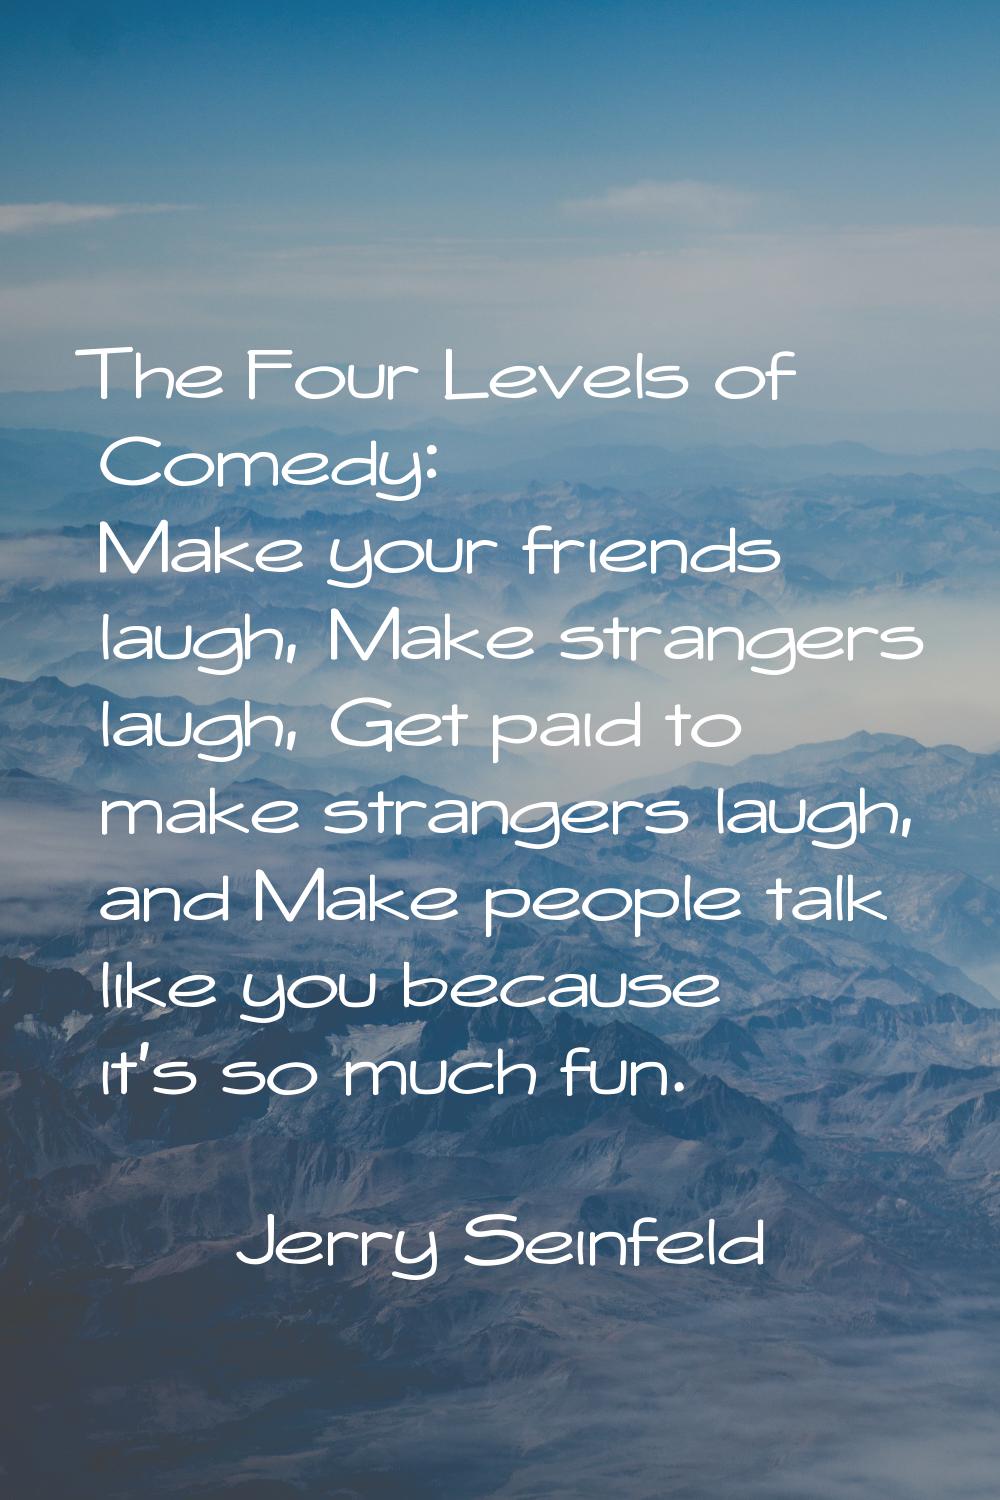 The Four Levels of Comedy: Make your friends laugh, Make strangers laugh, Get paid to make stranger